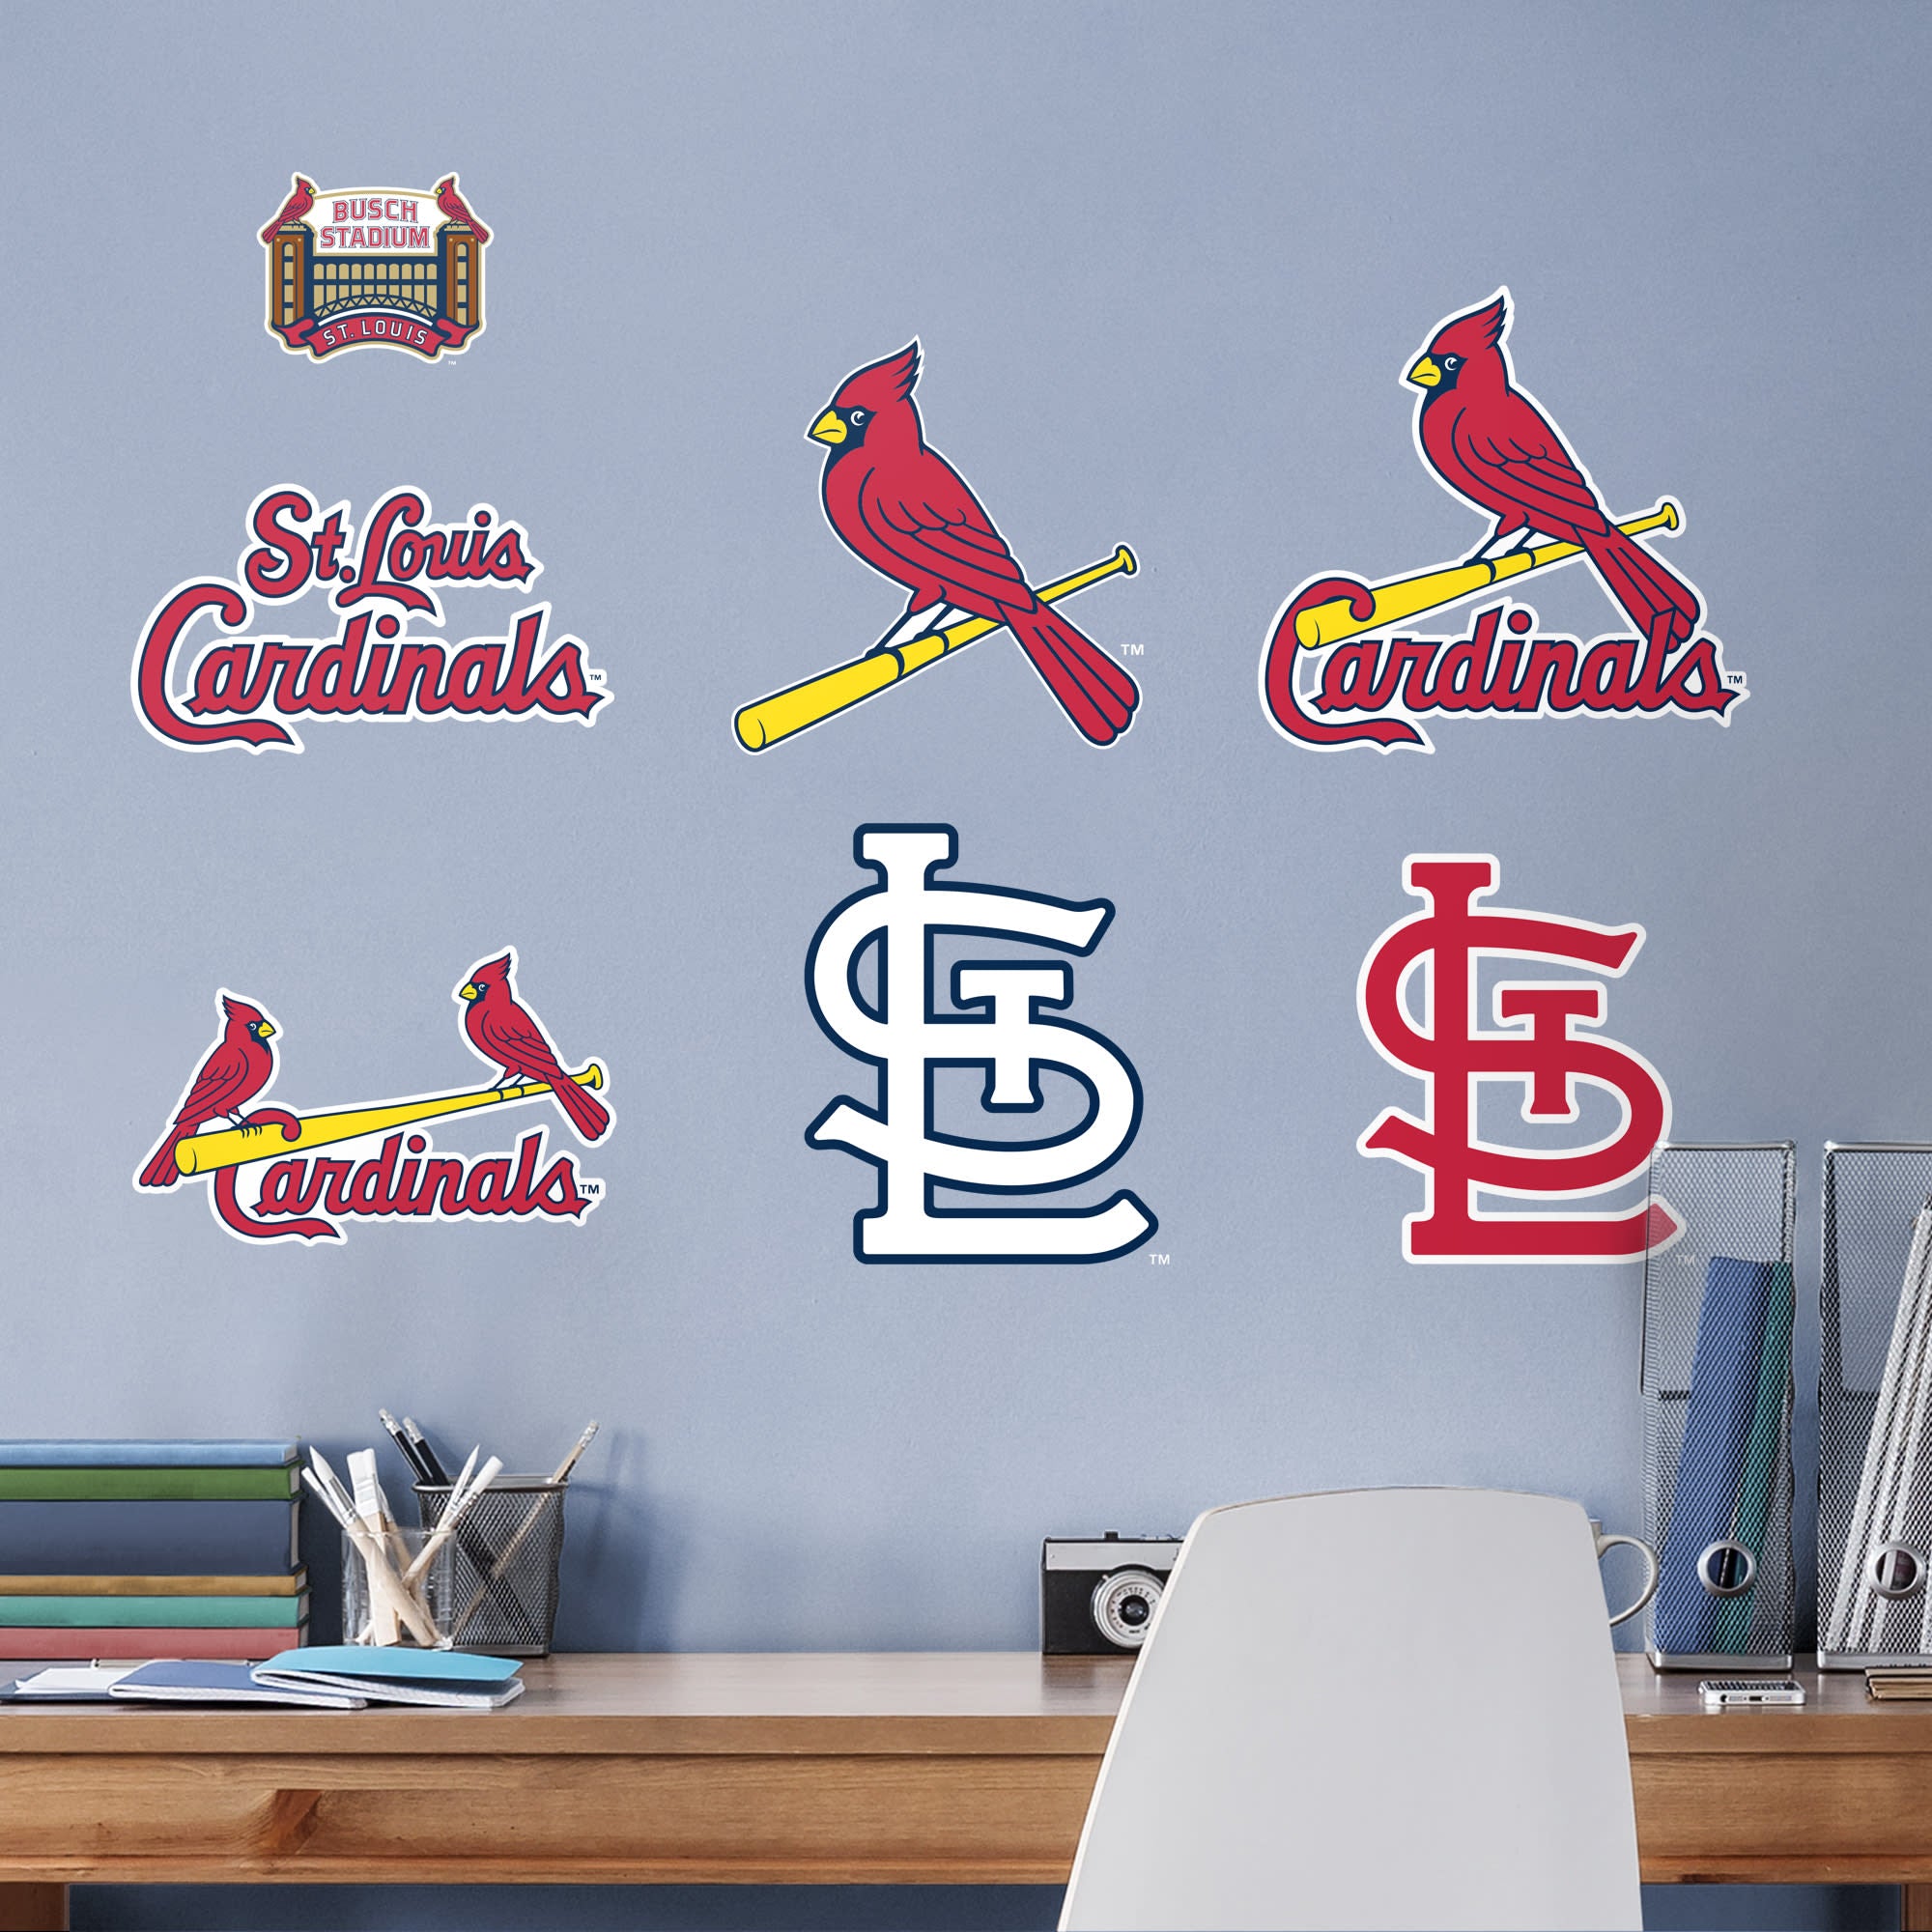 St. Louis Cardinals: Logo Assortment - Officially Licensed MLB Removable Wall Decals 75"W x 39.5"H by Fathead | Vinyl